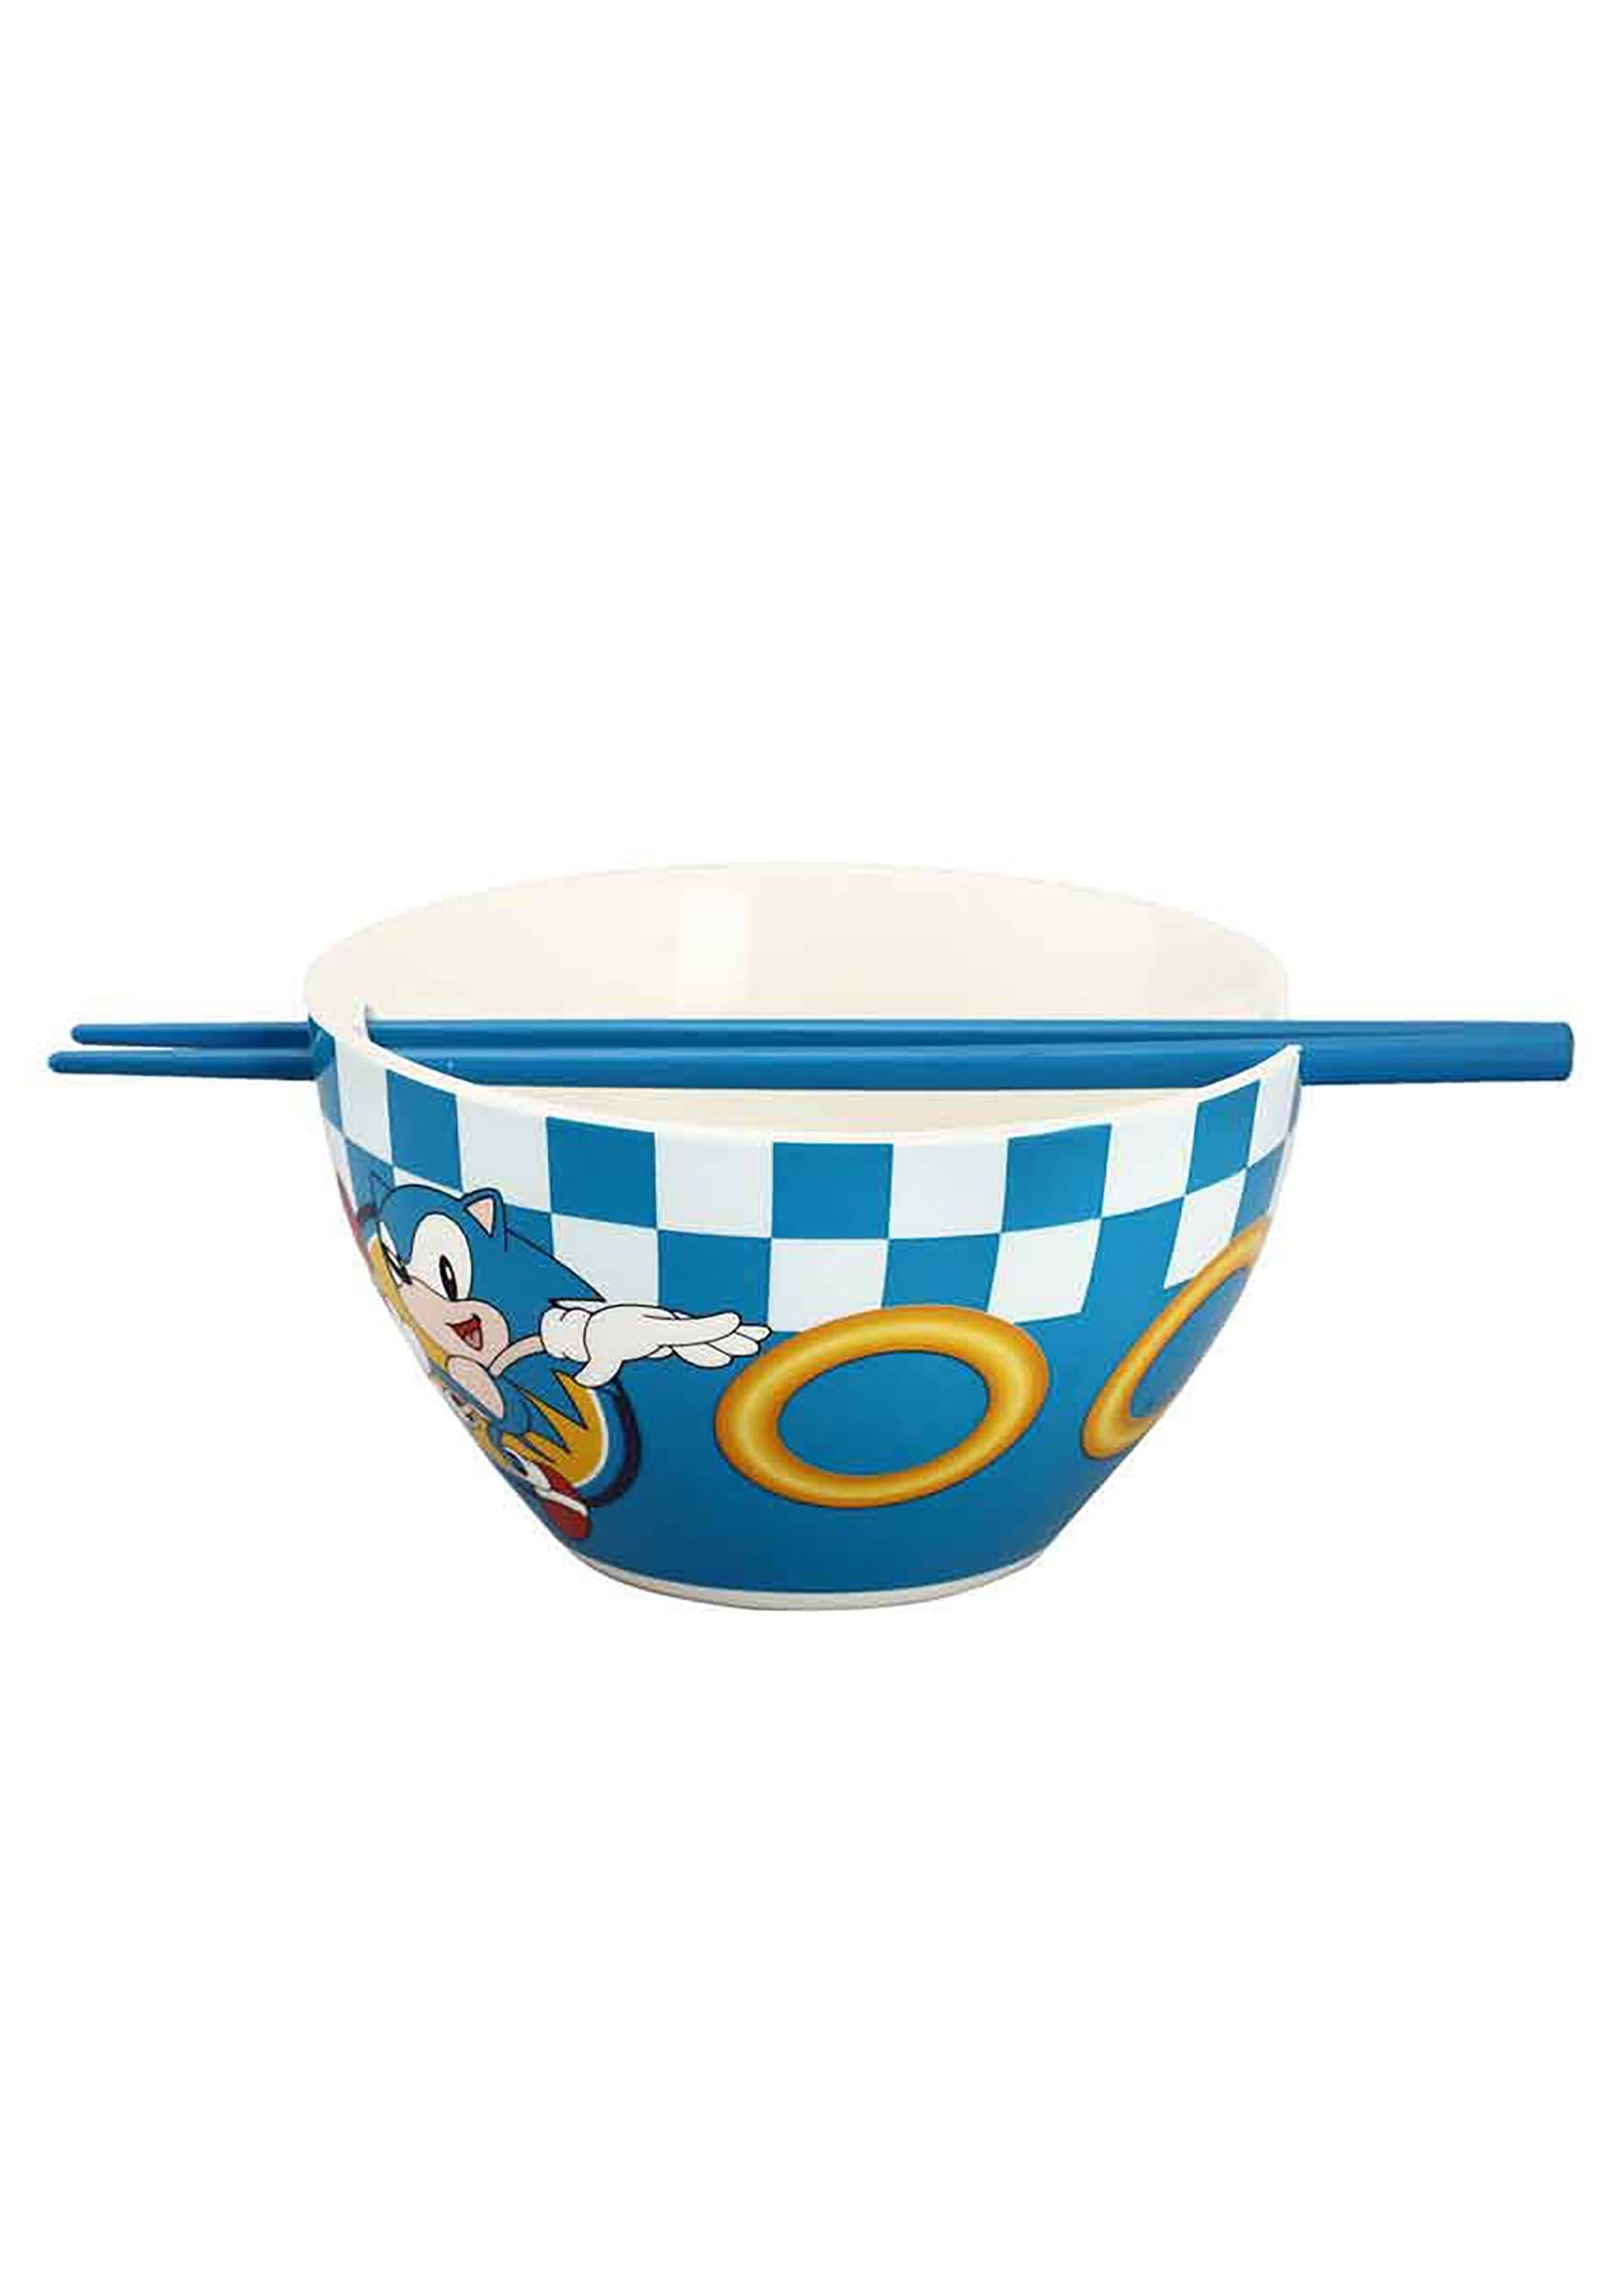 SONIC THE HEDGEHOG - CERAMIC BOWL WITH CHOPSTICKS (6 IN.)